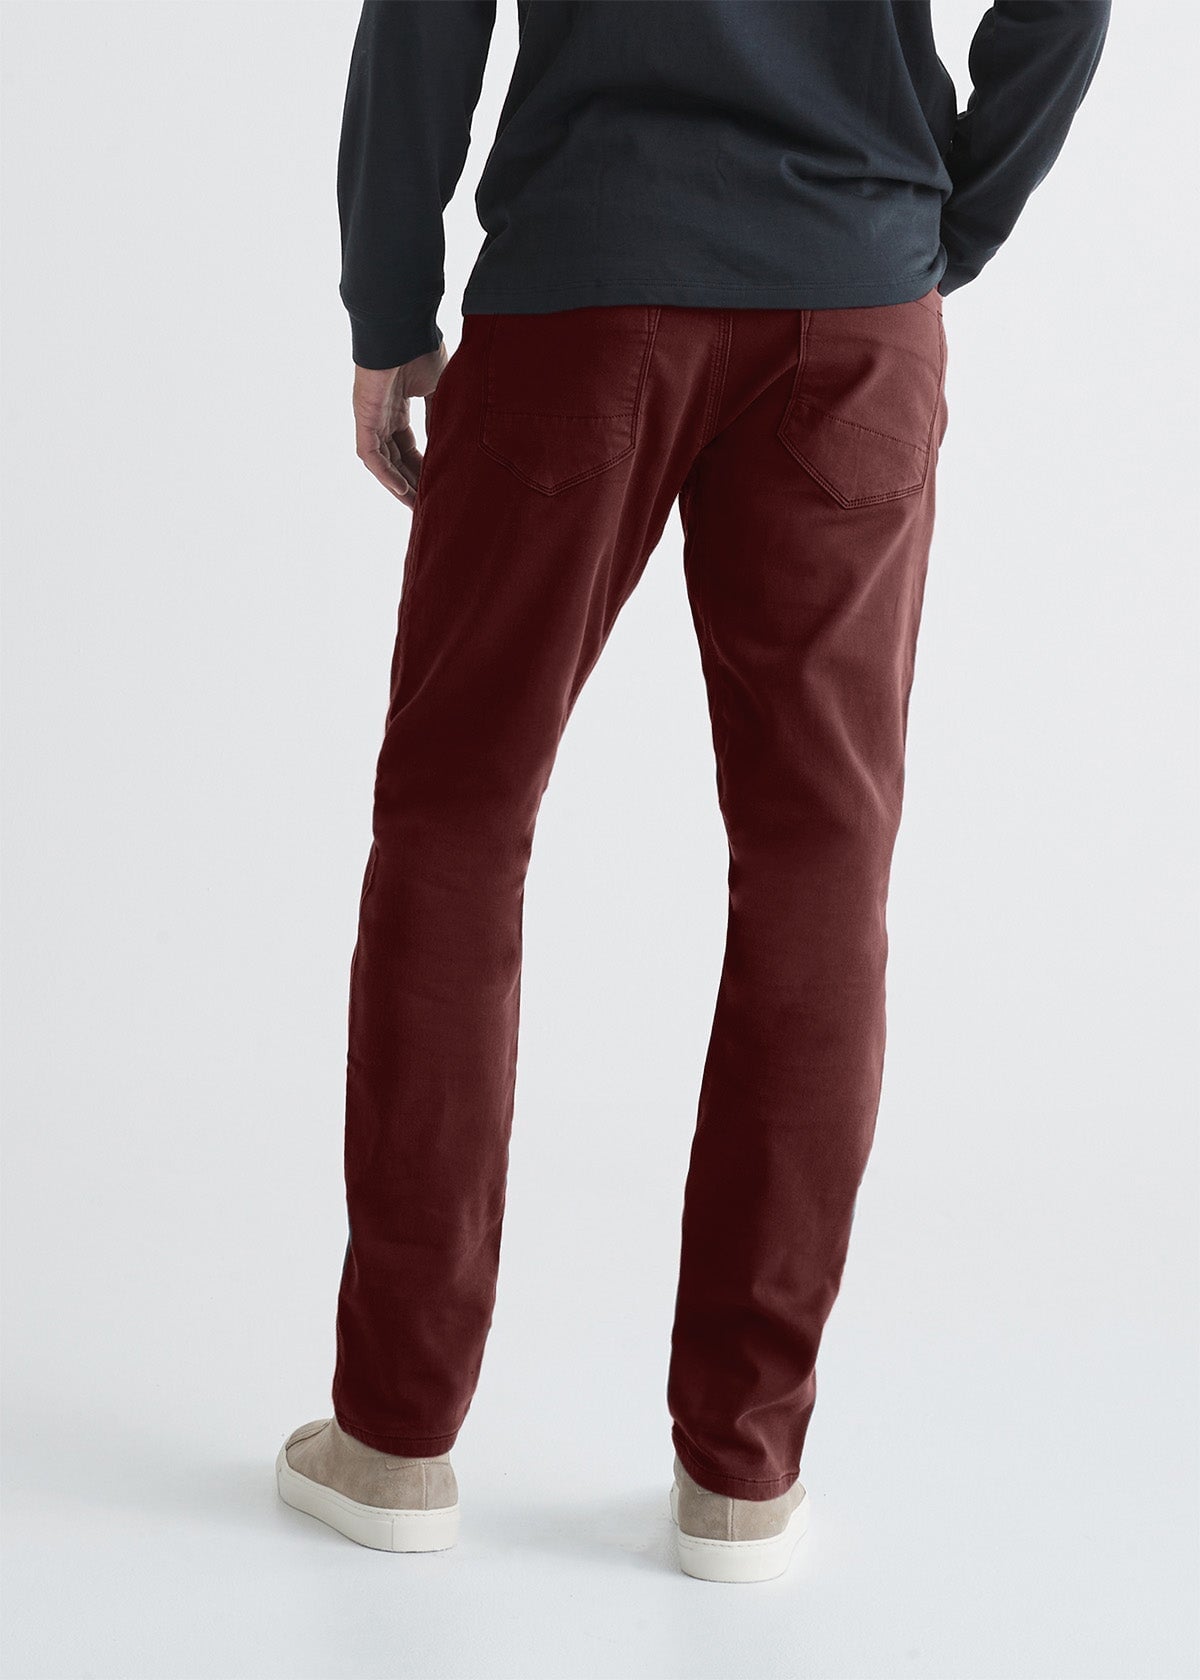 mens dark red relaxed fit dress sweatpant backl